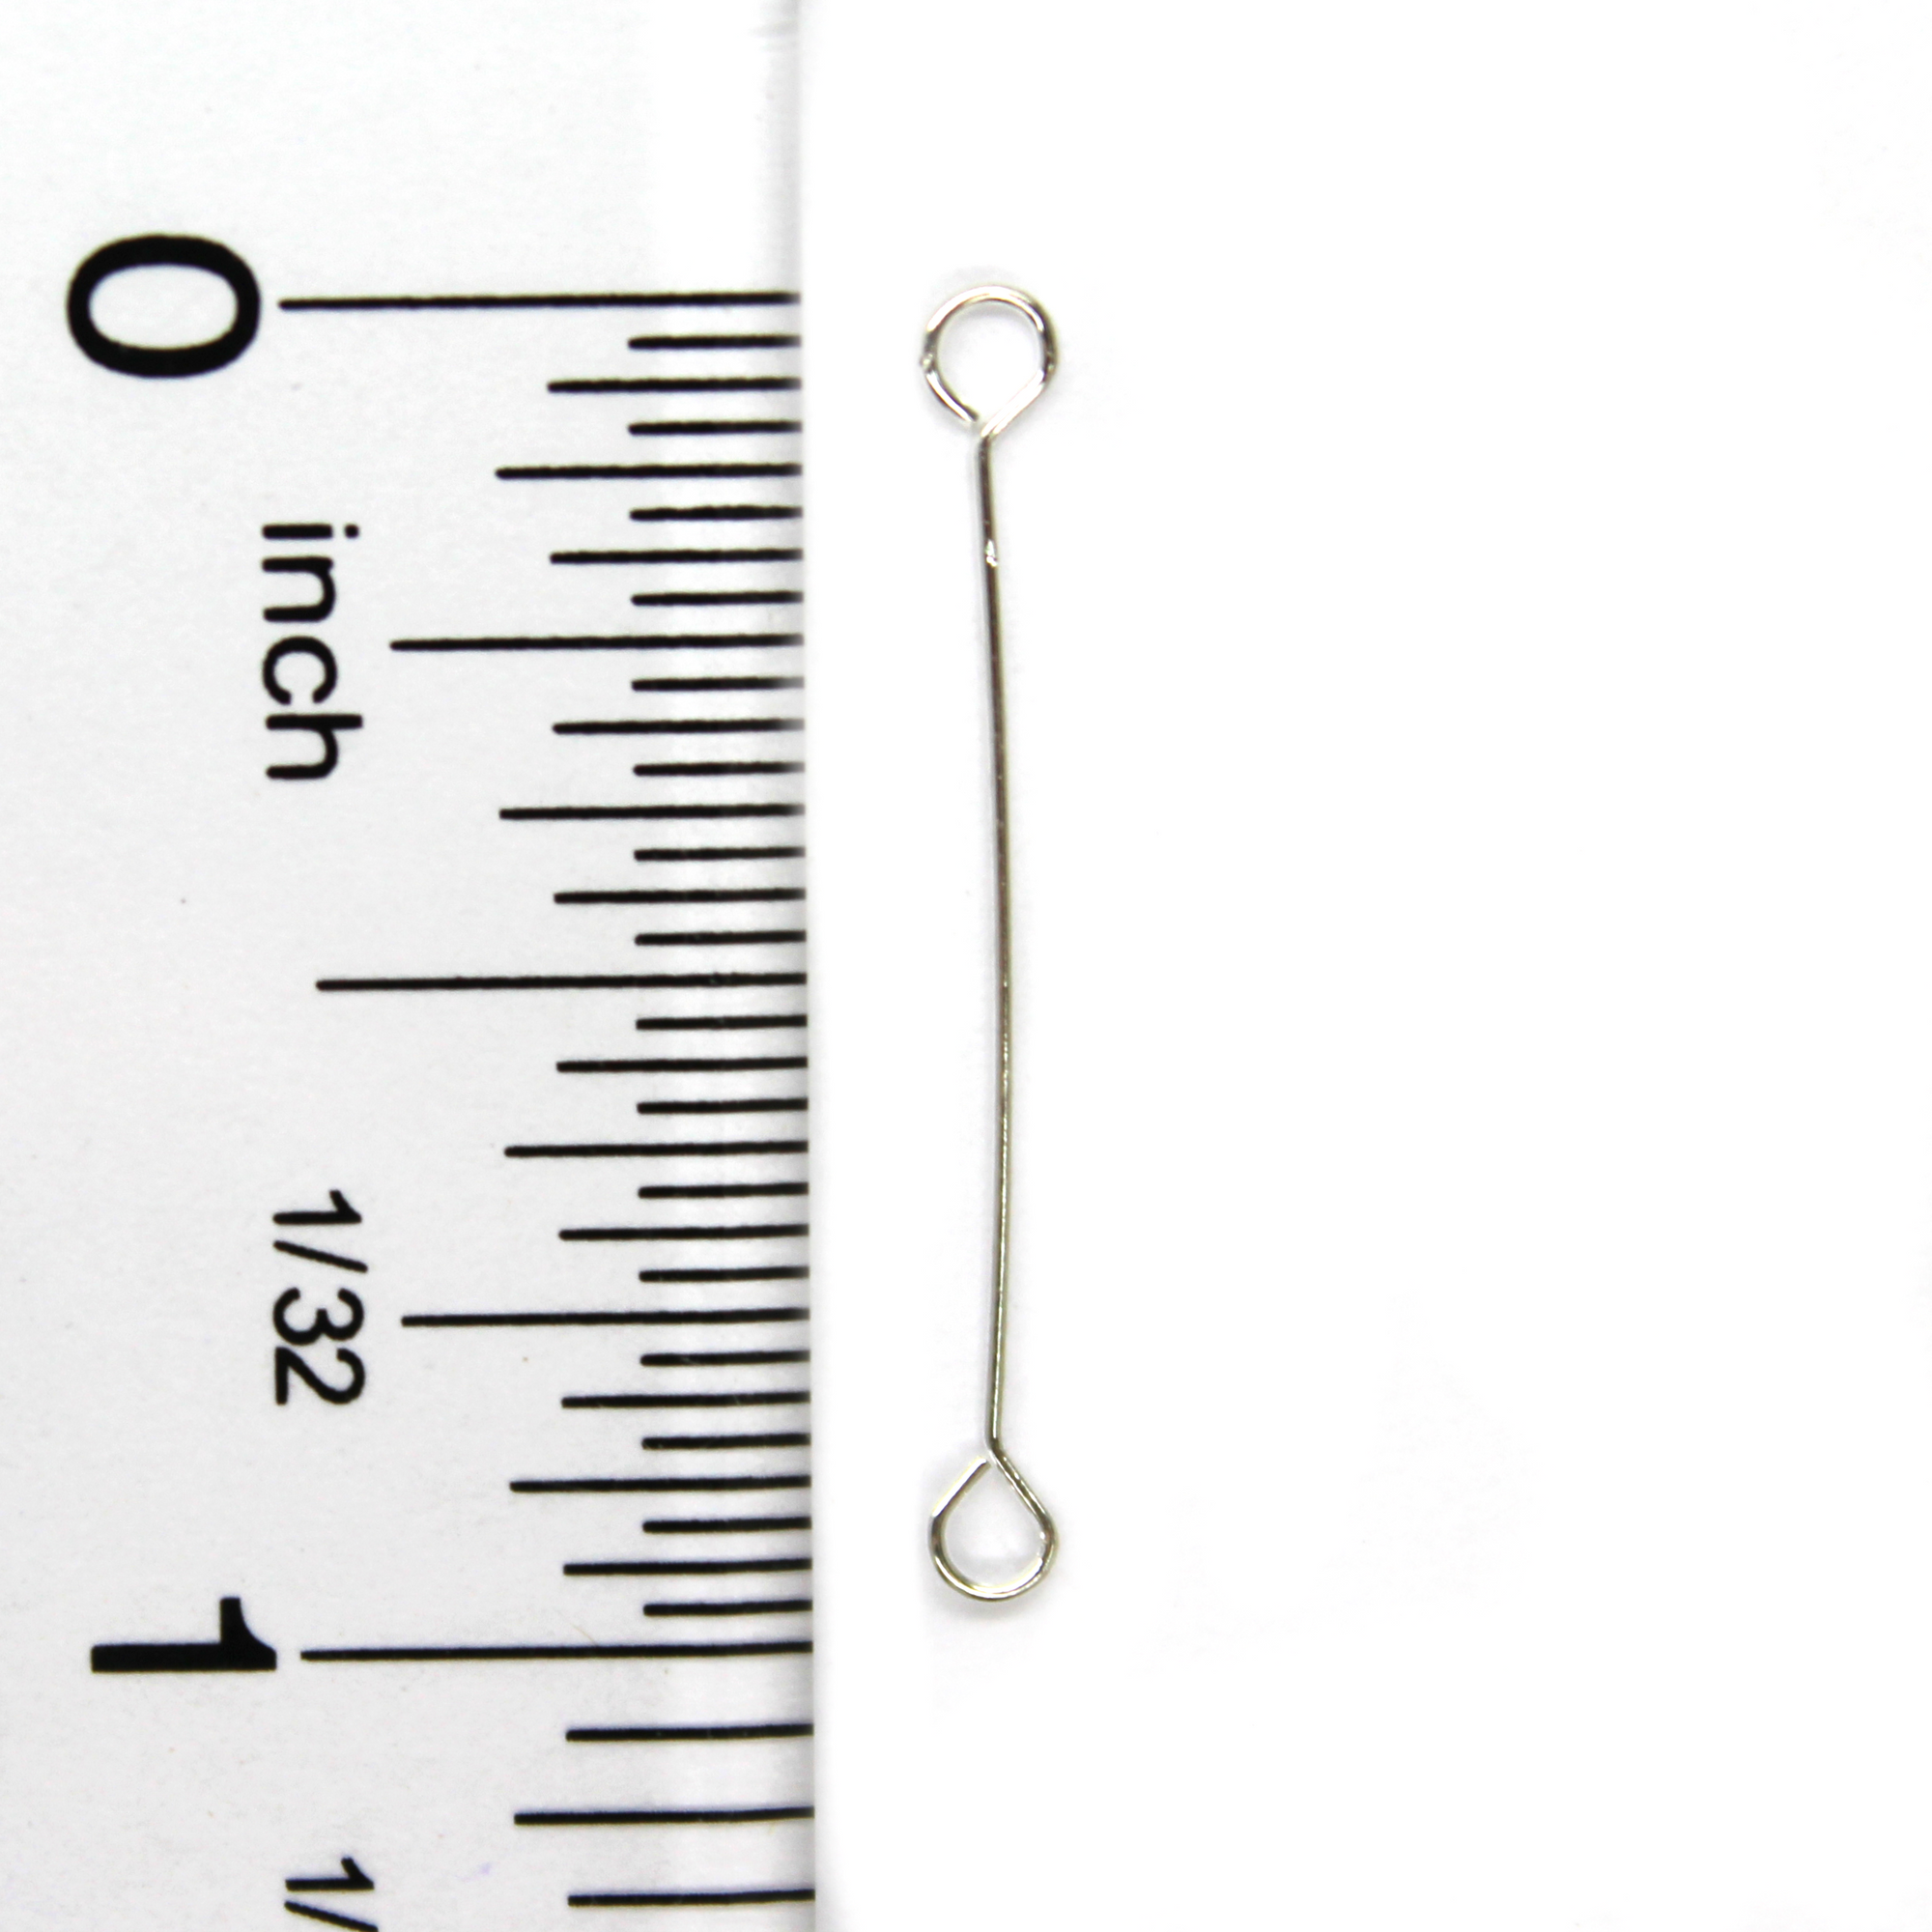 Eye Pins, Double Eye Pin, Bright Silver, Alloy, 0.98 inches, 25 Gauge, Sold Per Pkg ~35 pcs